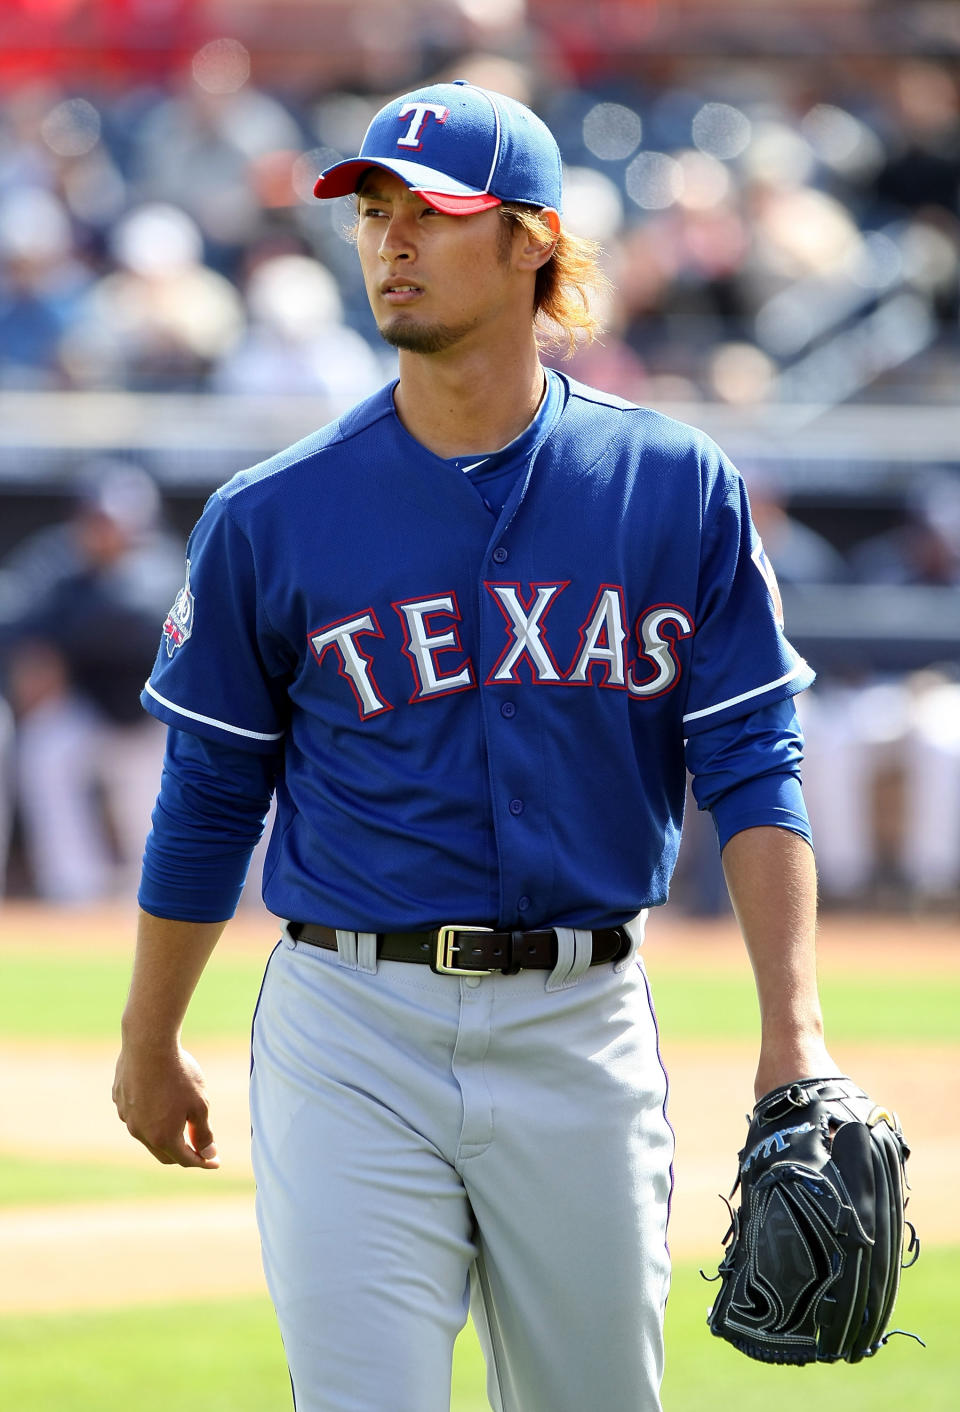 PEORIA, AZ - MARCH 07: Starting pitcher Yu Darvish #11 of the Texas Rangers walks to the dugout during the spring training game against the San Diego Padres at Peoria Stadium on March 7, 2012 in Peoria, Arizona. (Photo by Christian Petersen/Getty Images)